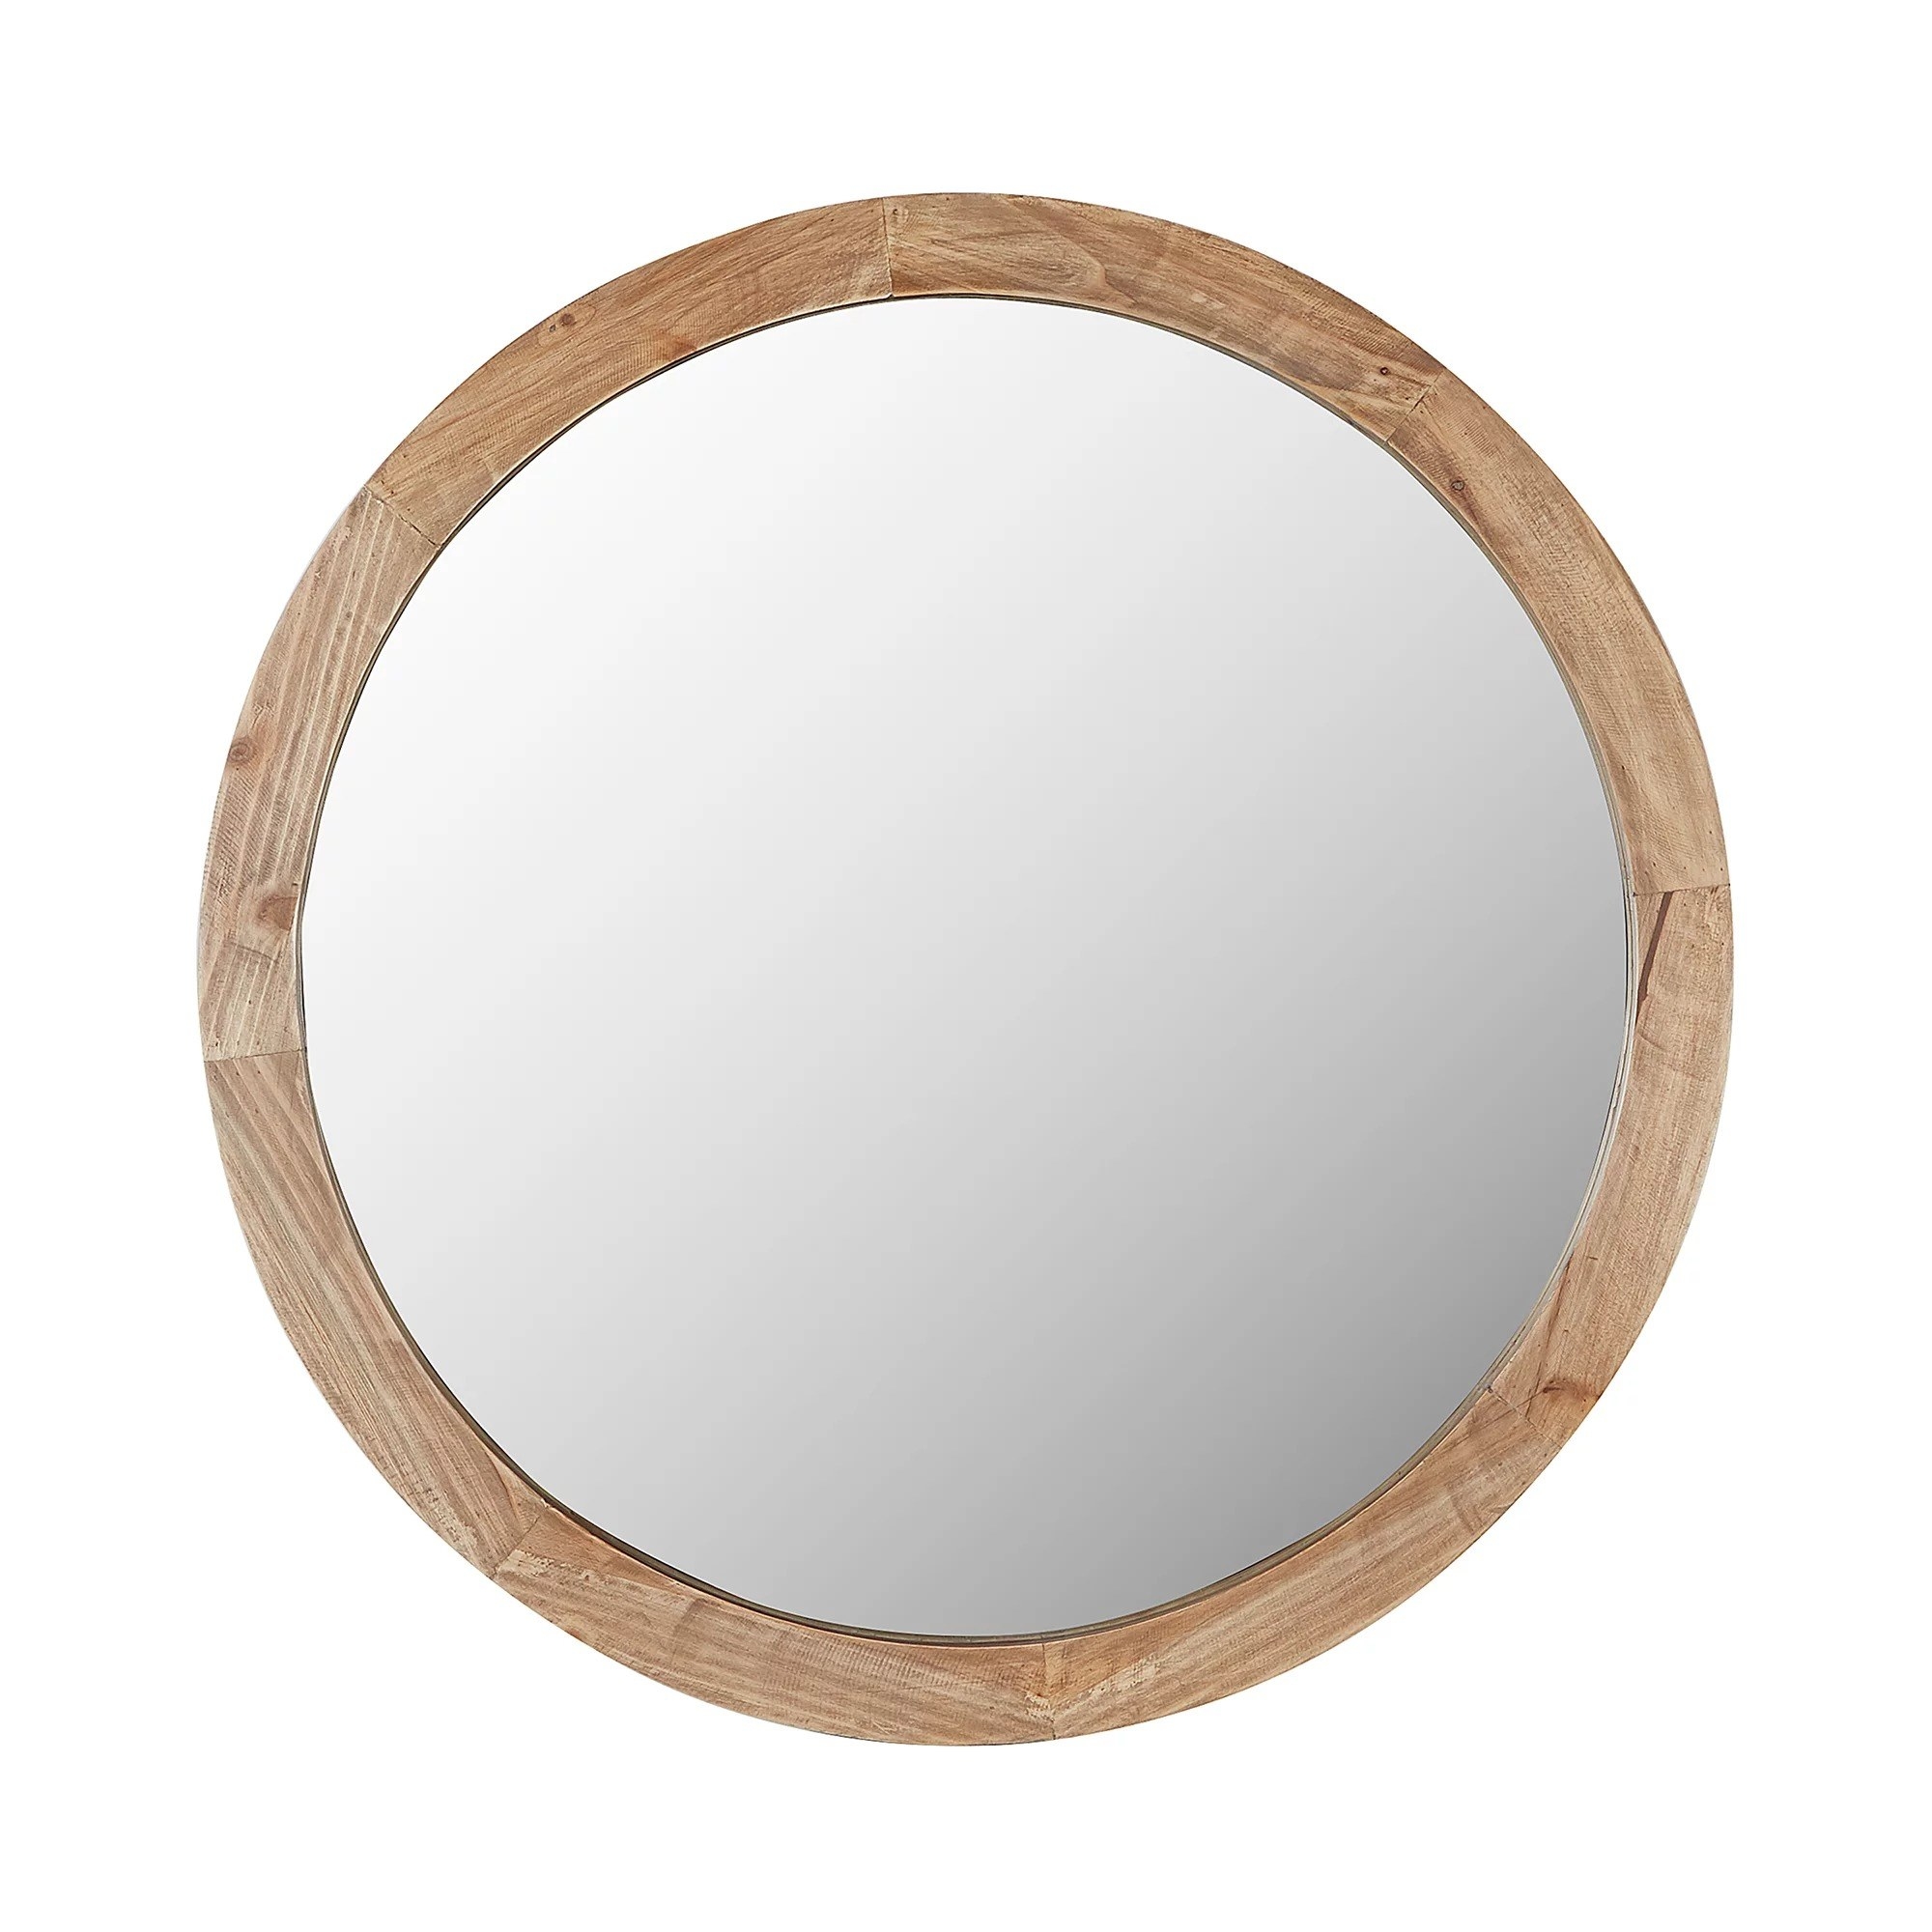 Wooden bold frame round mirror against a white backdrop